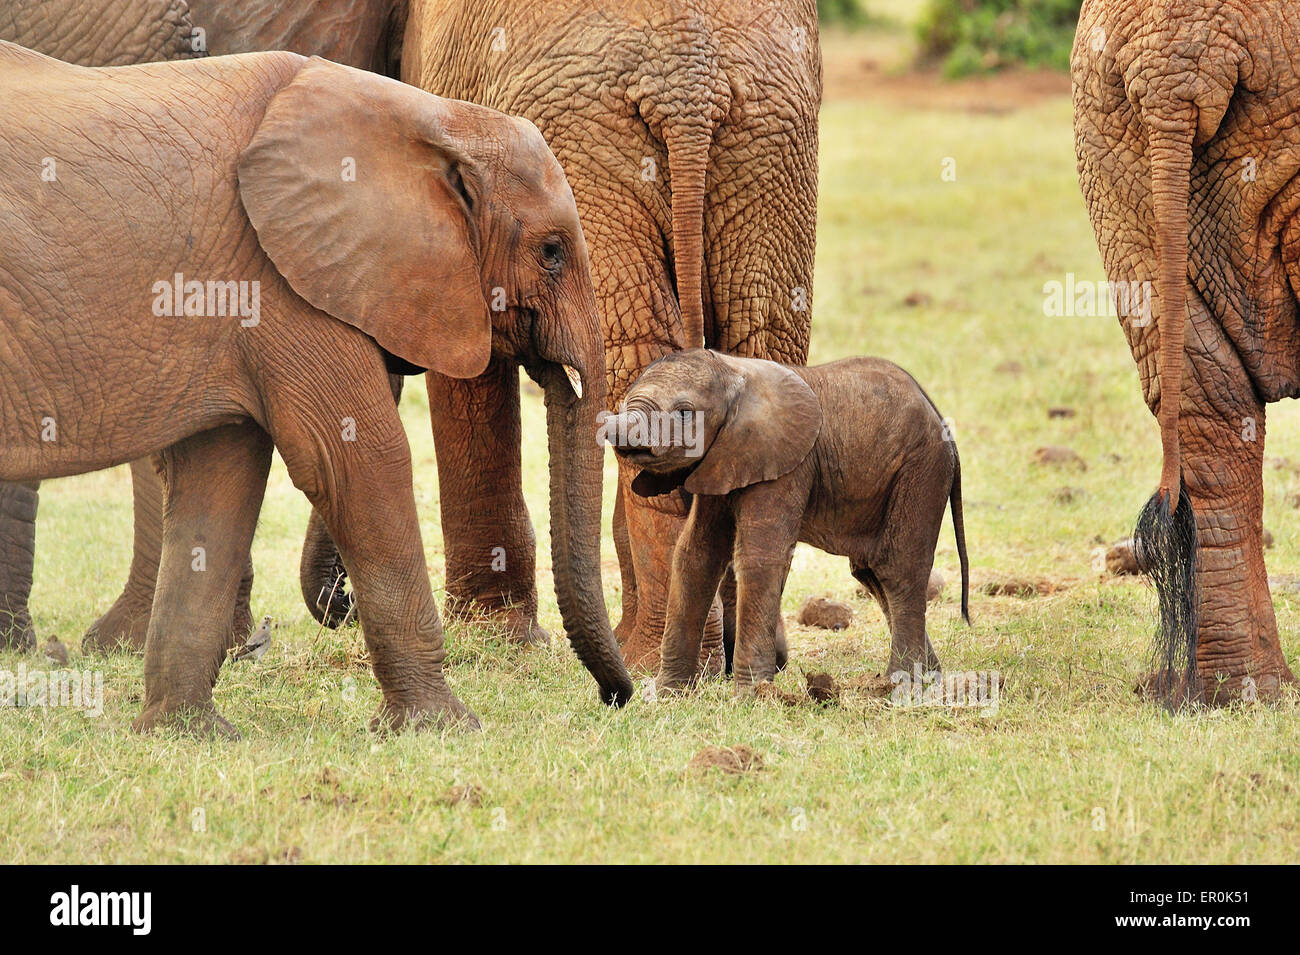 Baby elephant, looking for a playmate Stock Photo